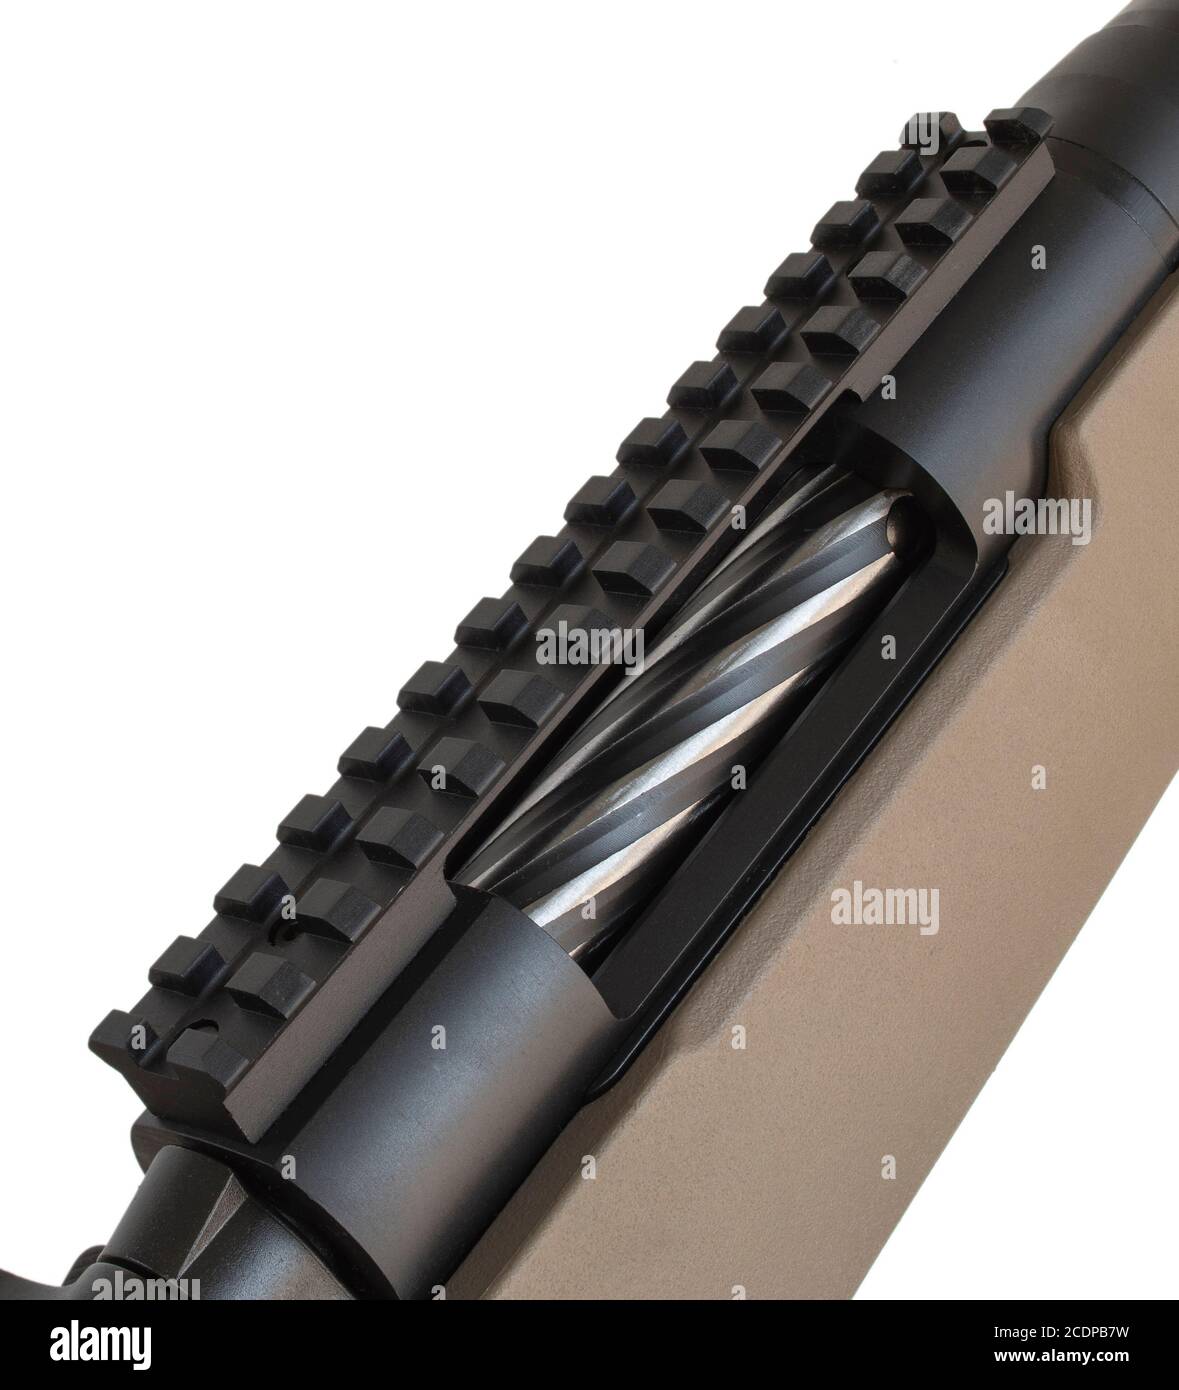 Bolt action rifle receiver with a rail on top for optic mounting Stock Photo